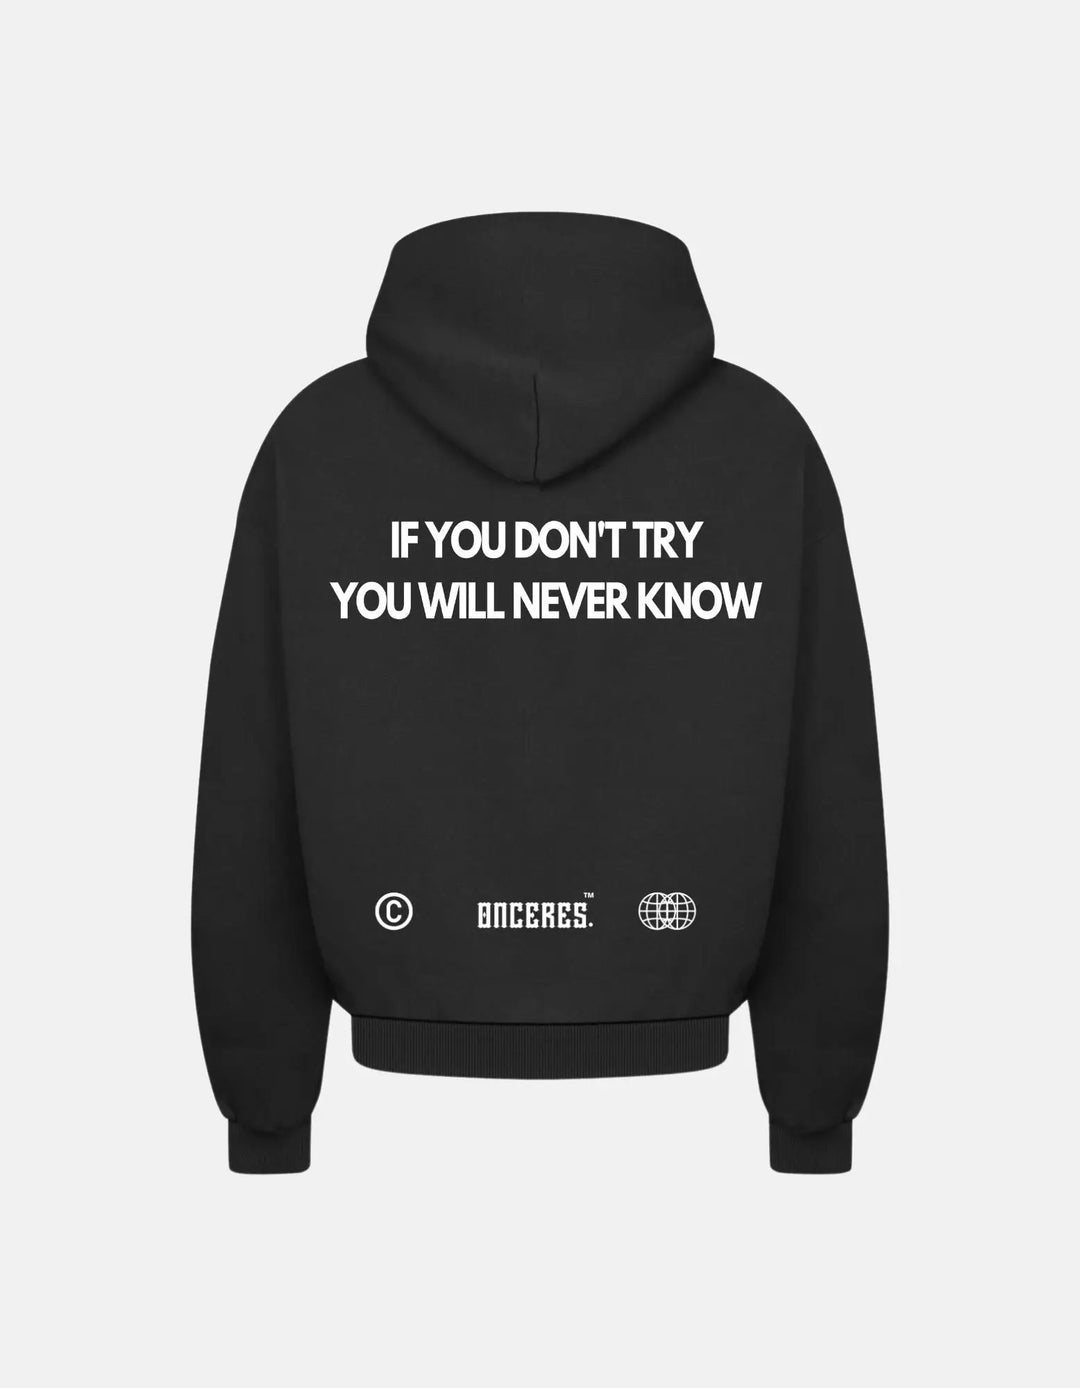 if you don't try, you will never know. oversized hoodie